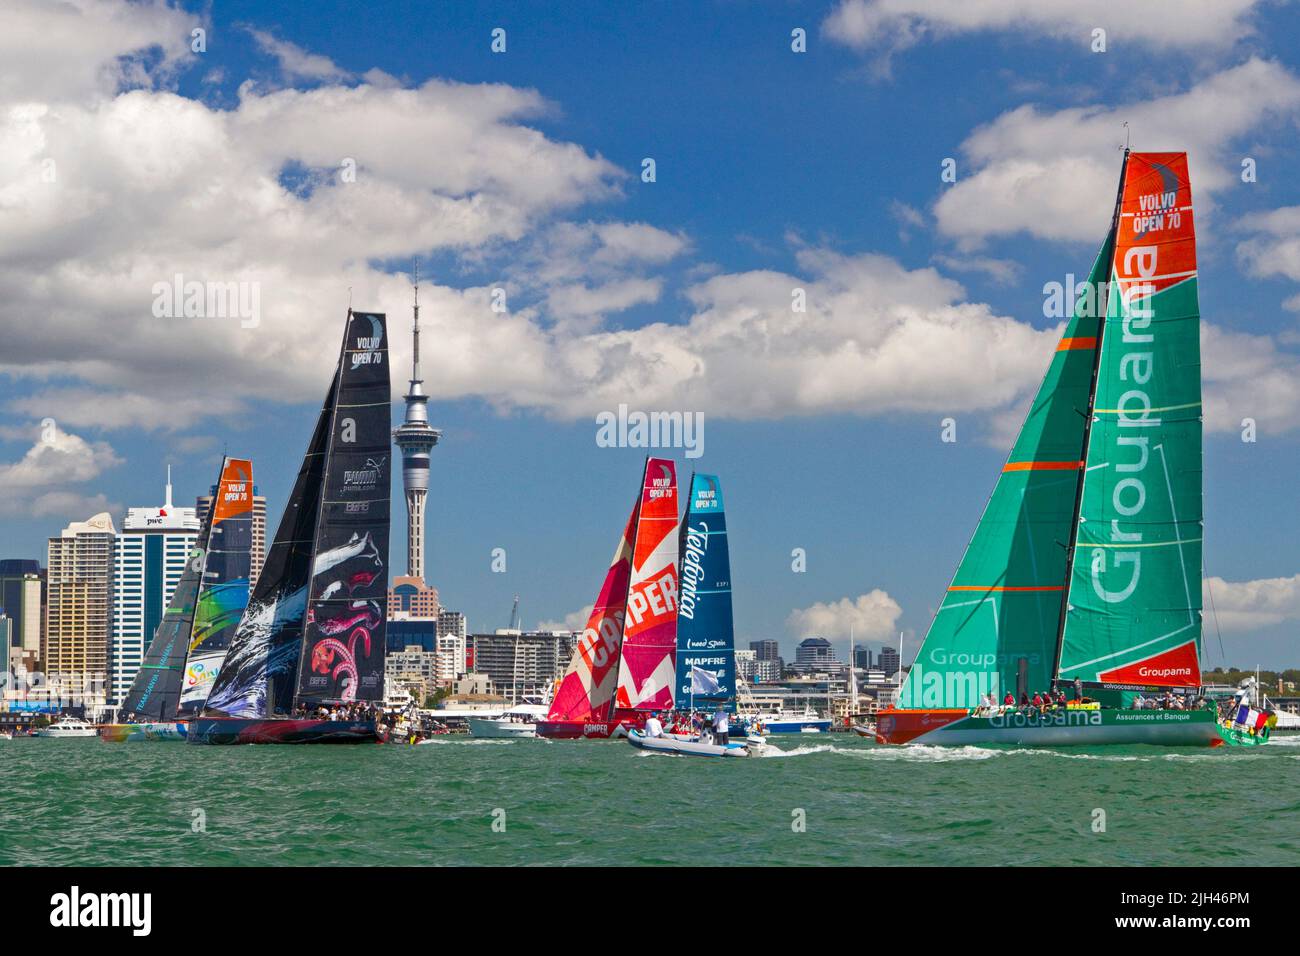 Team Sanya, left, Puma Ocean Racing, Camper with Emirates Team New Zealand, Team Telefonica and Groupama Sailing Team take part in the Pro-Am Race Stock Photo